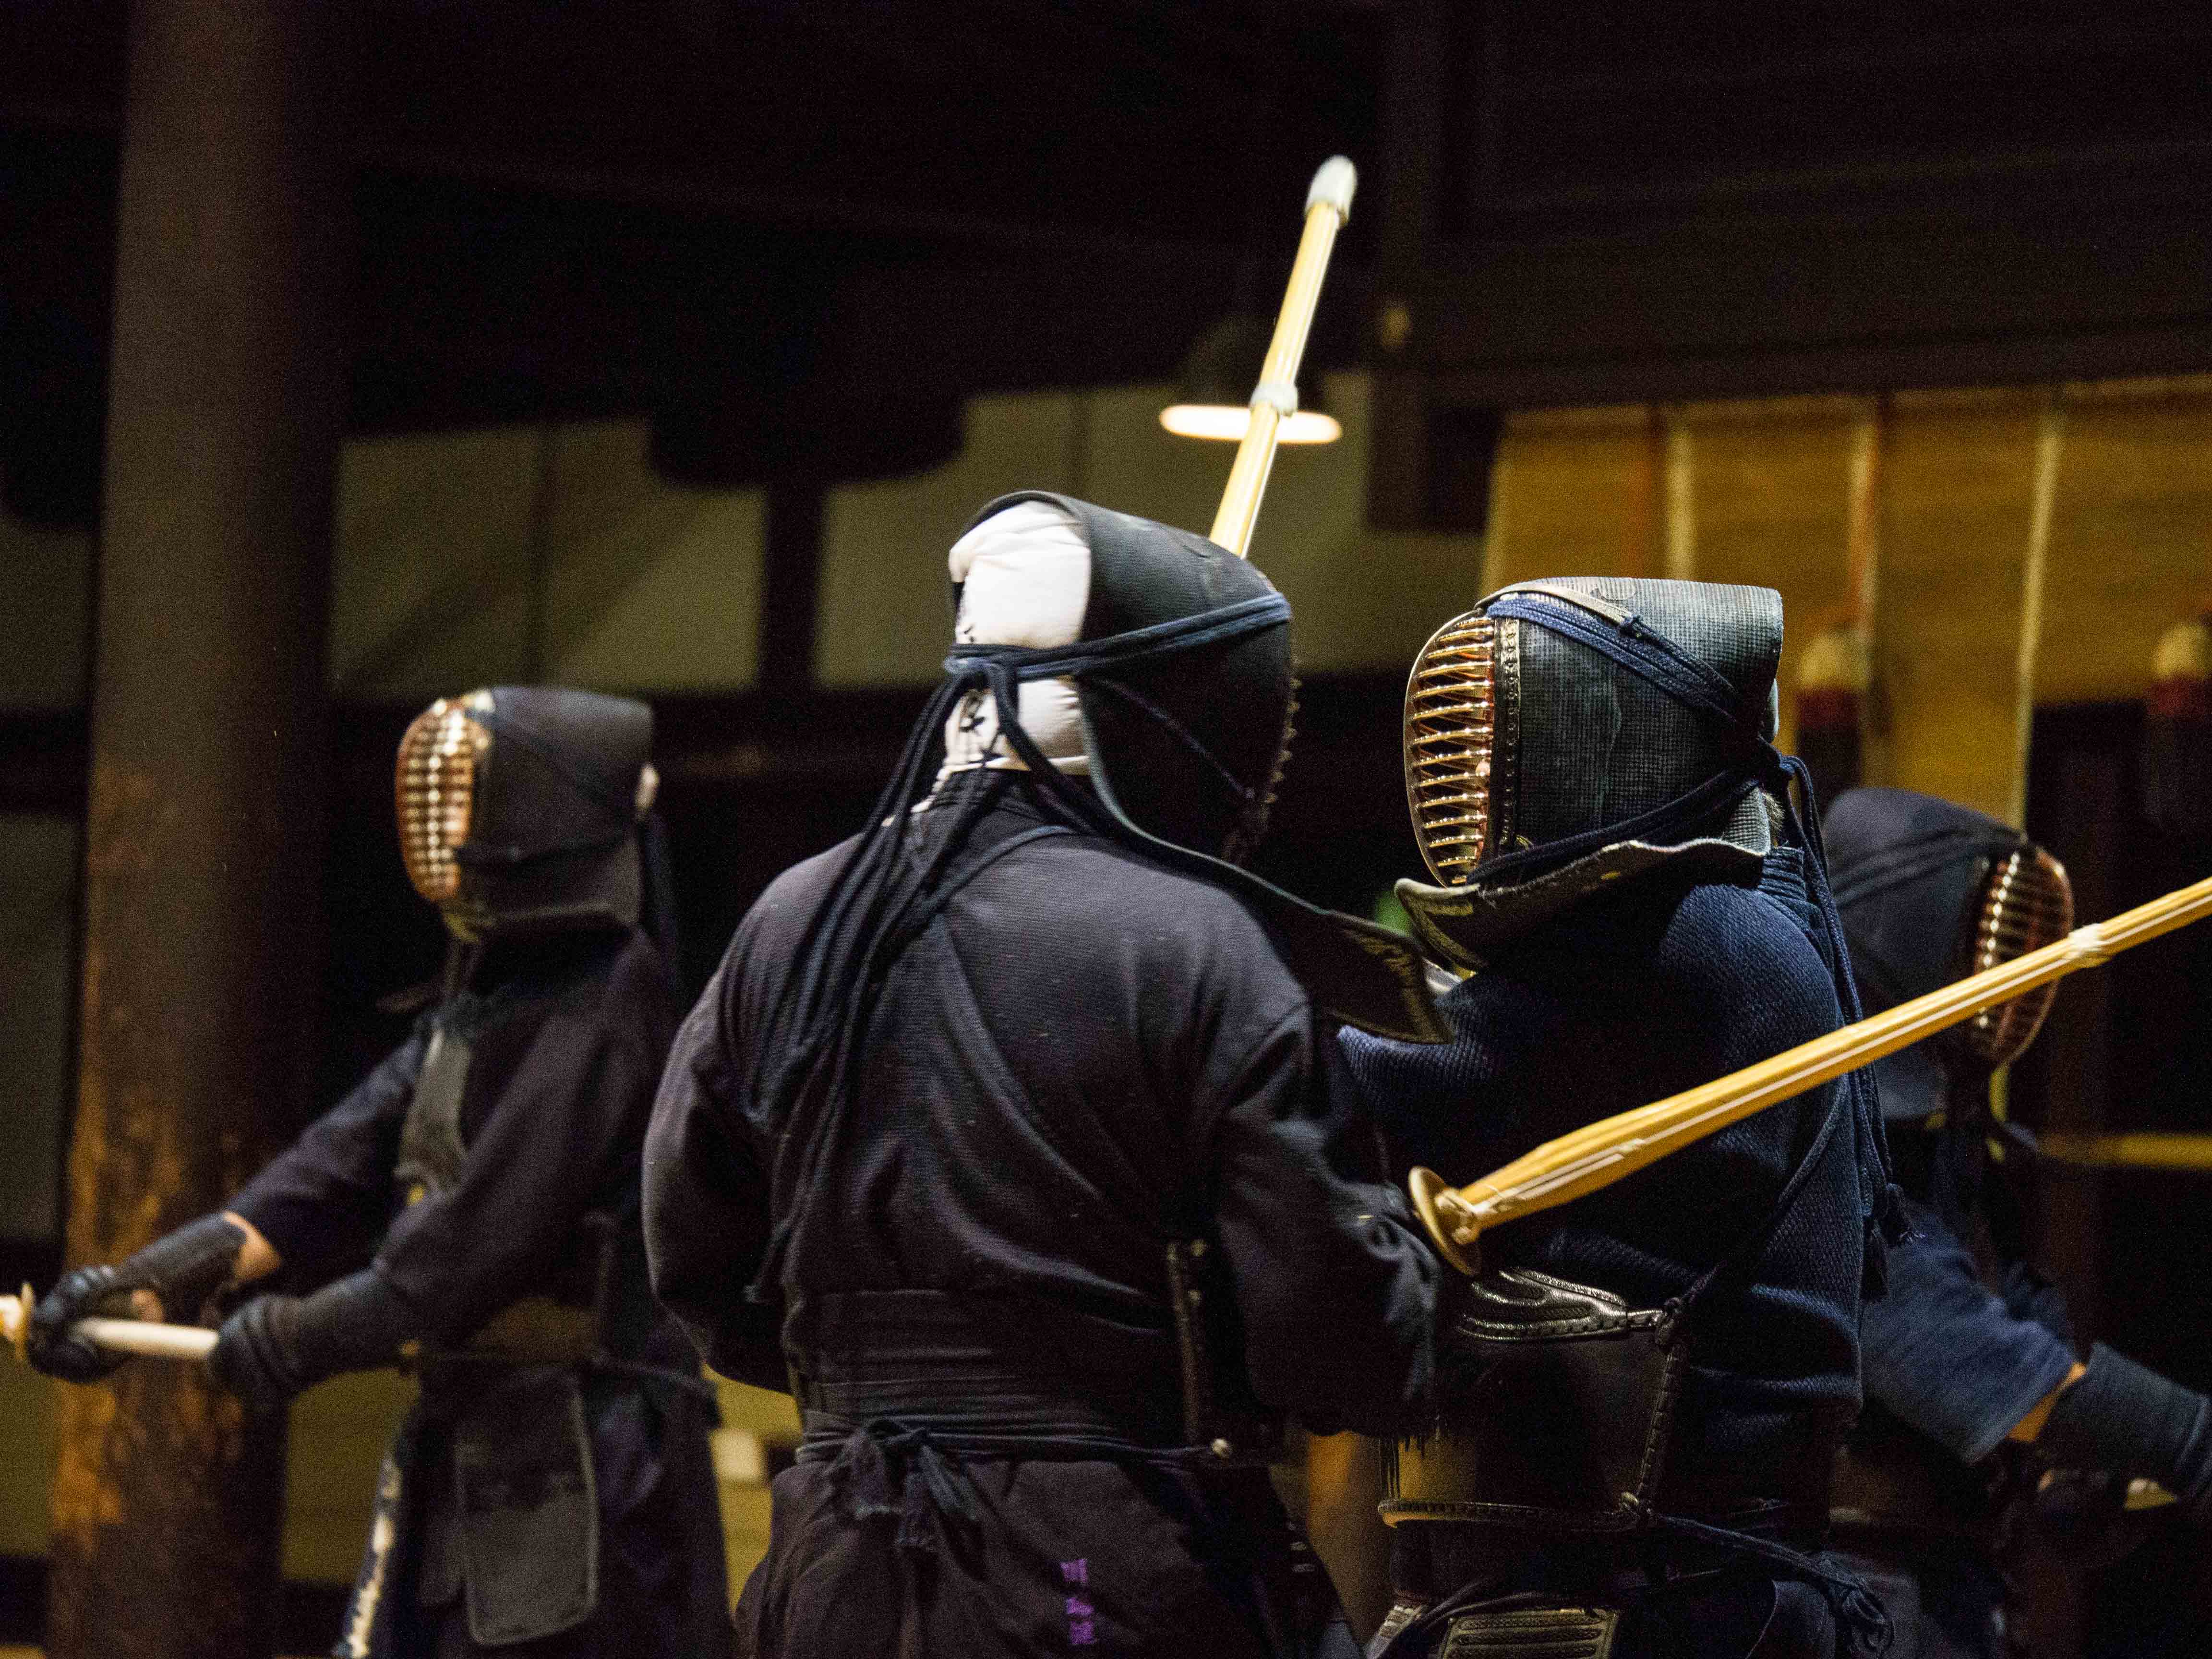 Exerting one's presence is an integral part of kendo practice. Its is not uncommon to yell at your opponent.